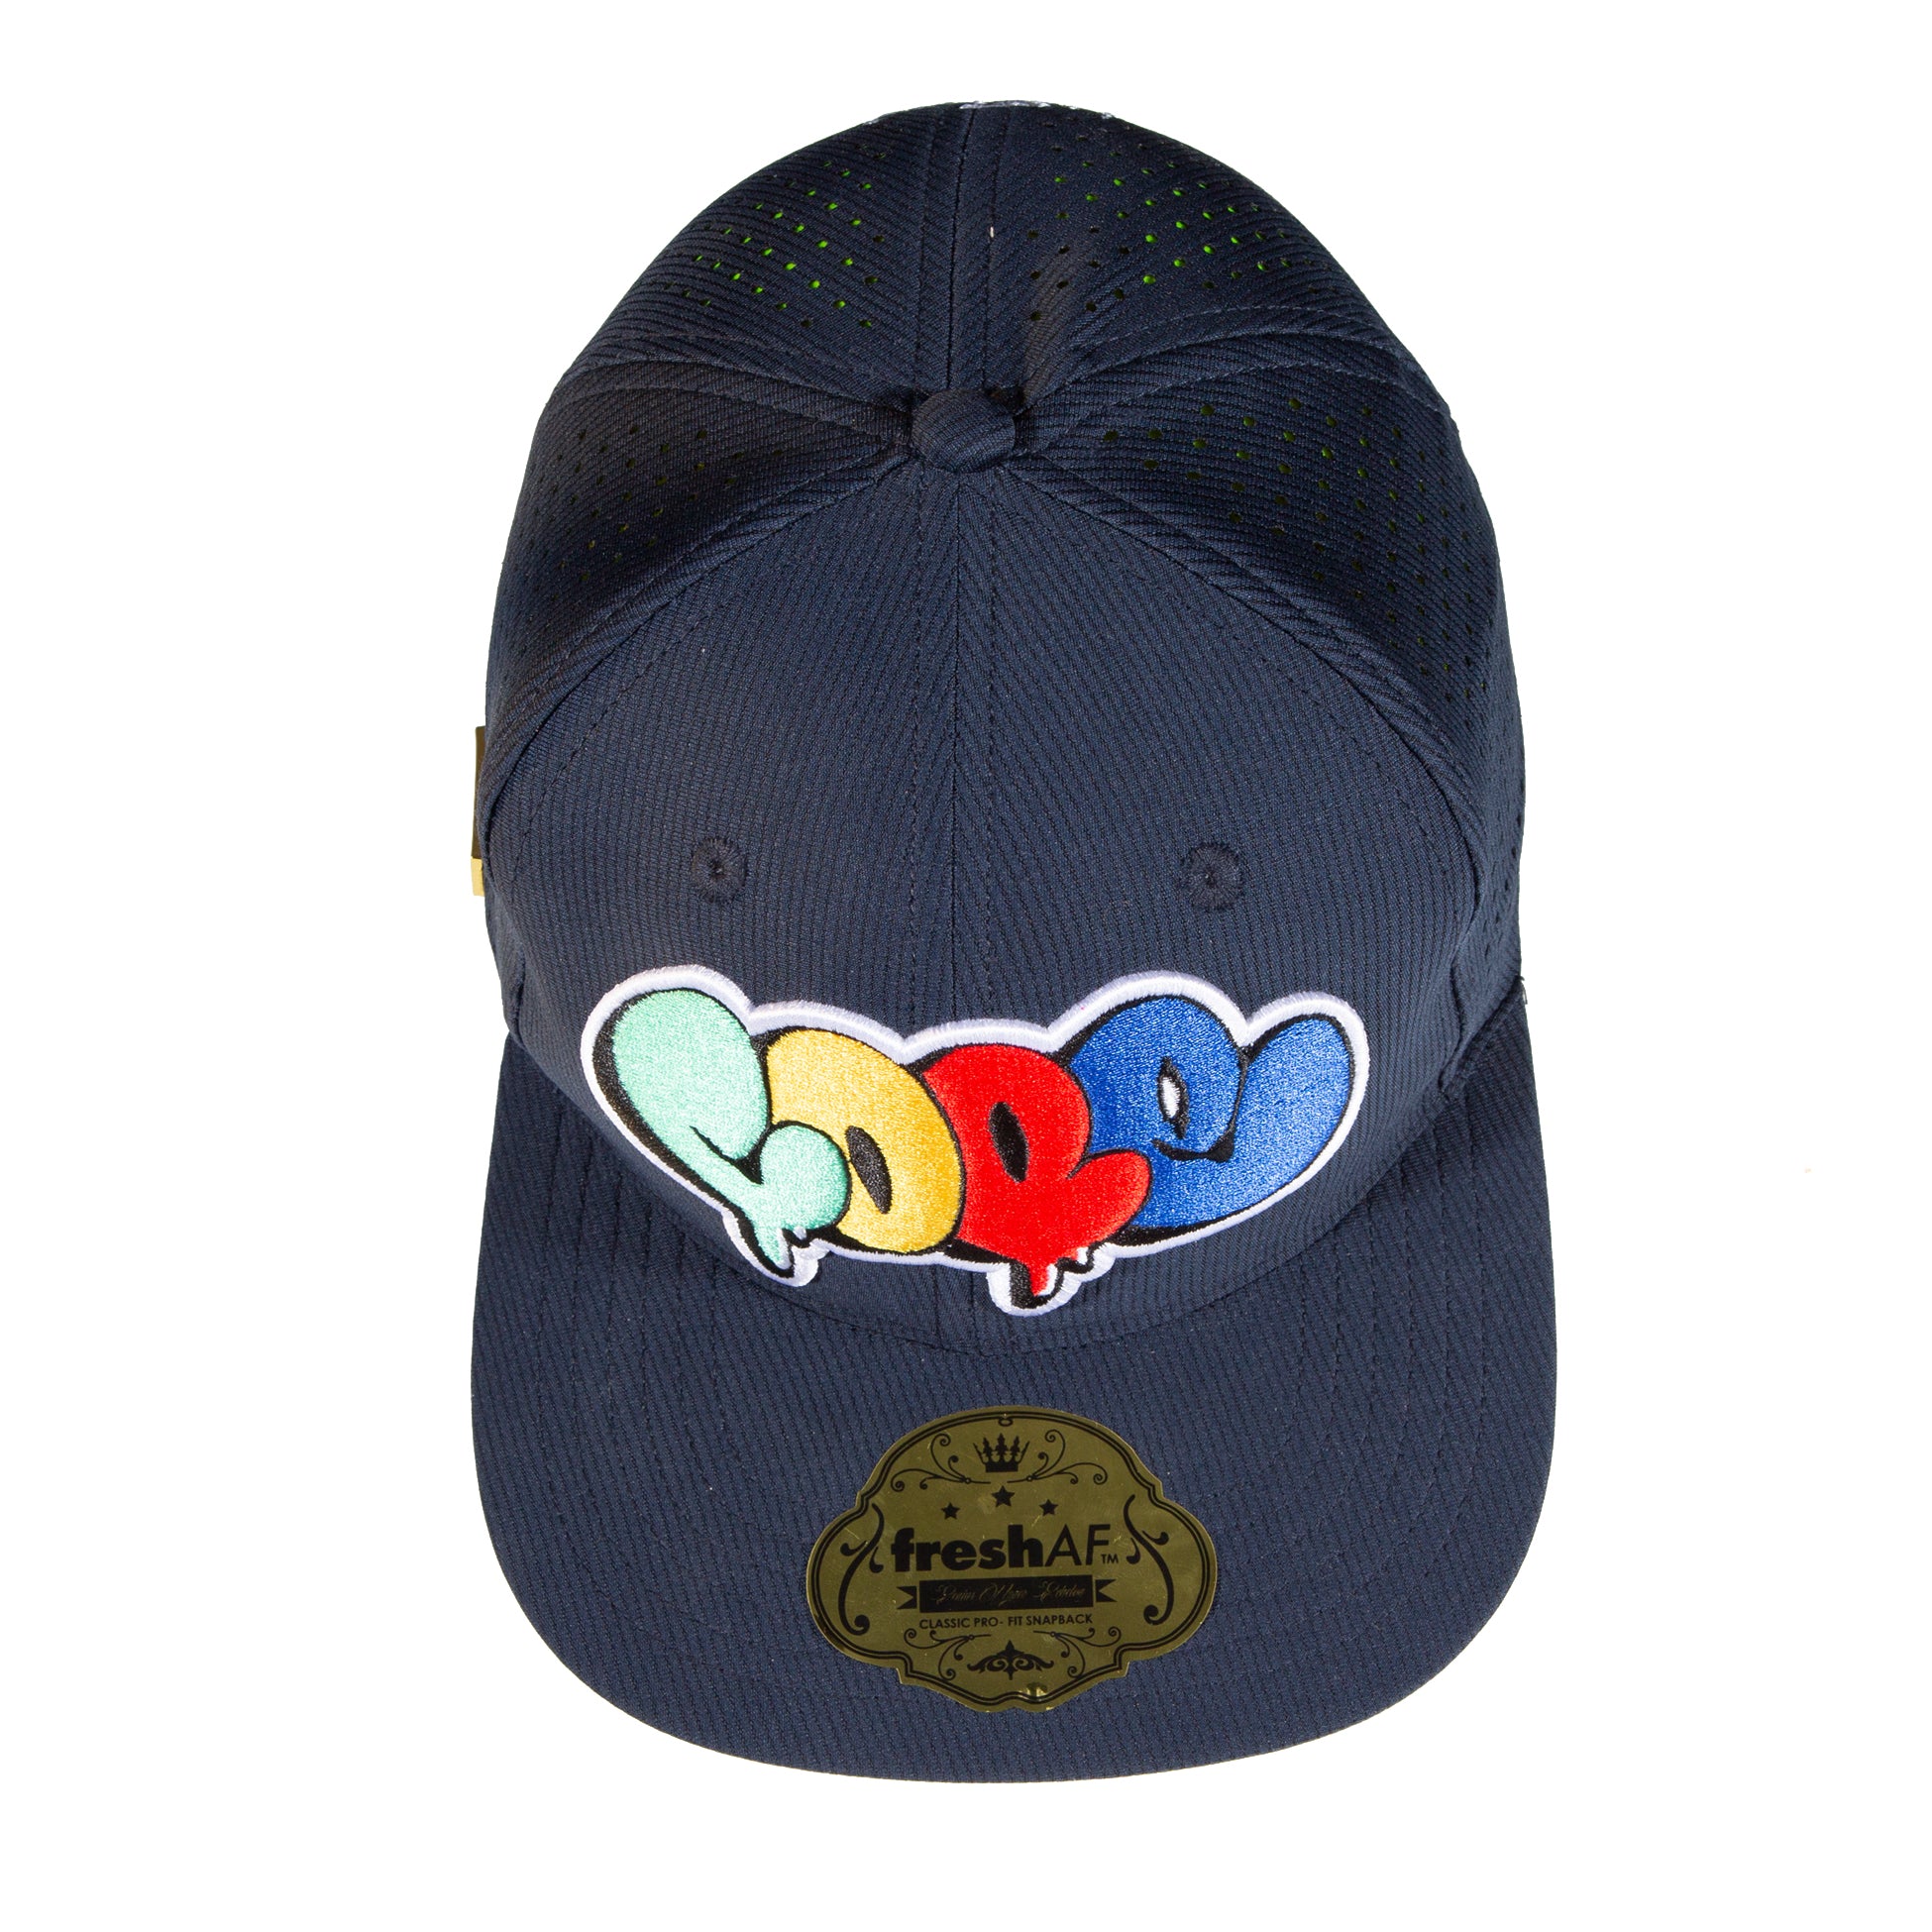 – Mesh COPE 3D Embroidery - - 2- Cap Brand Fresh Navy/Mutil-color AF Nylon